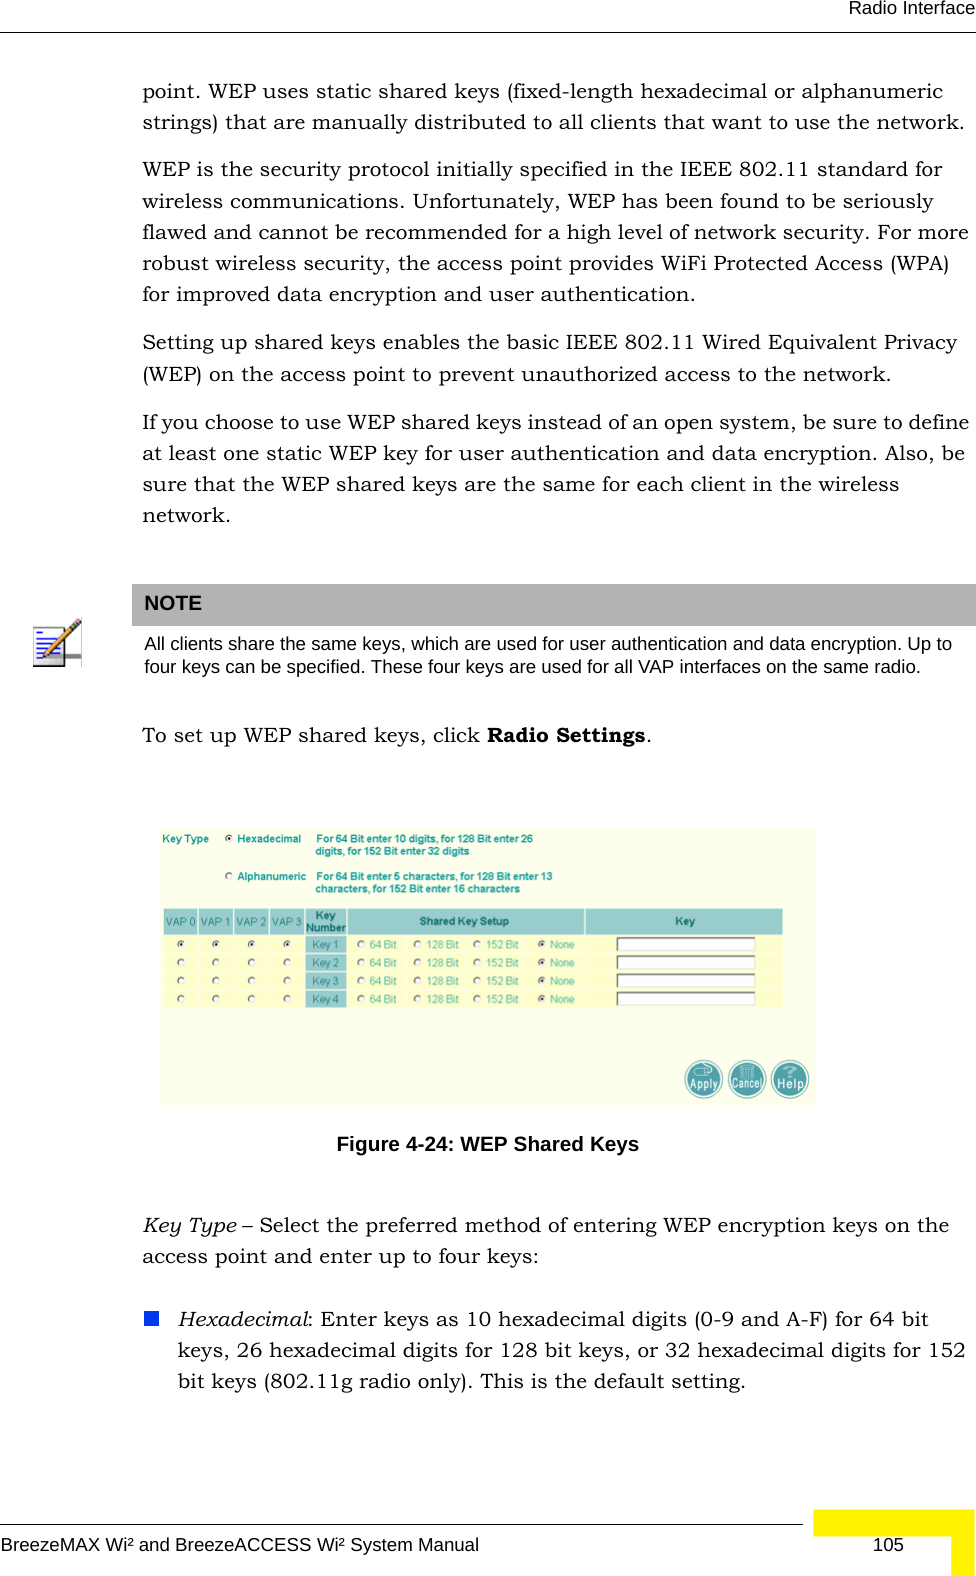 Radio InterfaceBreezeMAX Wi² and BreezeACCESS Wi² System Manual  105point. WEP uses static shared keys (fixed-length hexadecimal or alphanumeric strings) that are manually distributed to all clients that want to use the network.WEP is the security protocol initially specified in the IEEE 802.11 standard for wireless communications. Unfortunately, WEP has been found to be seriously flawed and cannot be recommended for a high level of network security. For more robust wireless security, the access point provides WiFi Protected Access (WPA) for improved data encryption and user authentication.Setting up shared keys enables the basic IEEE 802.11 Wired Equivalent Privacy (WEP) on the access point to prevent unauthorized access to the network.If you choose to use WEP shared keys instead of an open system, be sure to define at least one static WEP key for user authentication and data encryption. Also, be sure that the WEP shared keys are the same for each client in the wireless network.To set up WEP shared keys, click Radio Settings. Key Type – Select the preferred method of entering WEP encryption keys on the access point and enter up to four keys:Hexadecimal: Enter keys as 10 hexadecimal digits (0-9 and A-F) for 64 bit keys, 26 hexadecimal digits for 128 bit keys, or 32 hexadecimal digits for 152 bit keys (802.11g radio only). This is the default setting.NOTEAll clients share the same keys, which are used for user authentication and data encryption. Up to four keys can be specified. These four keys are used for all VAP interfaces on the same radio.Figure 4-24: WEP Shared Keys